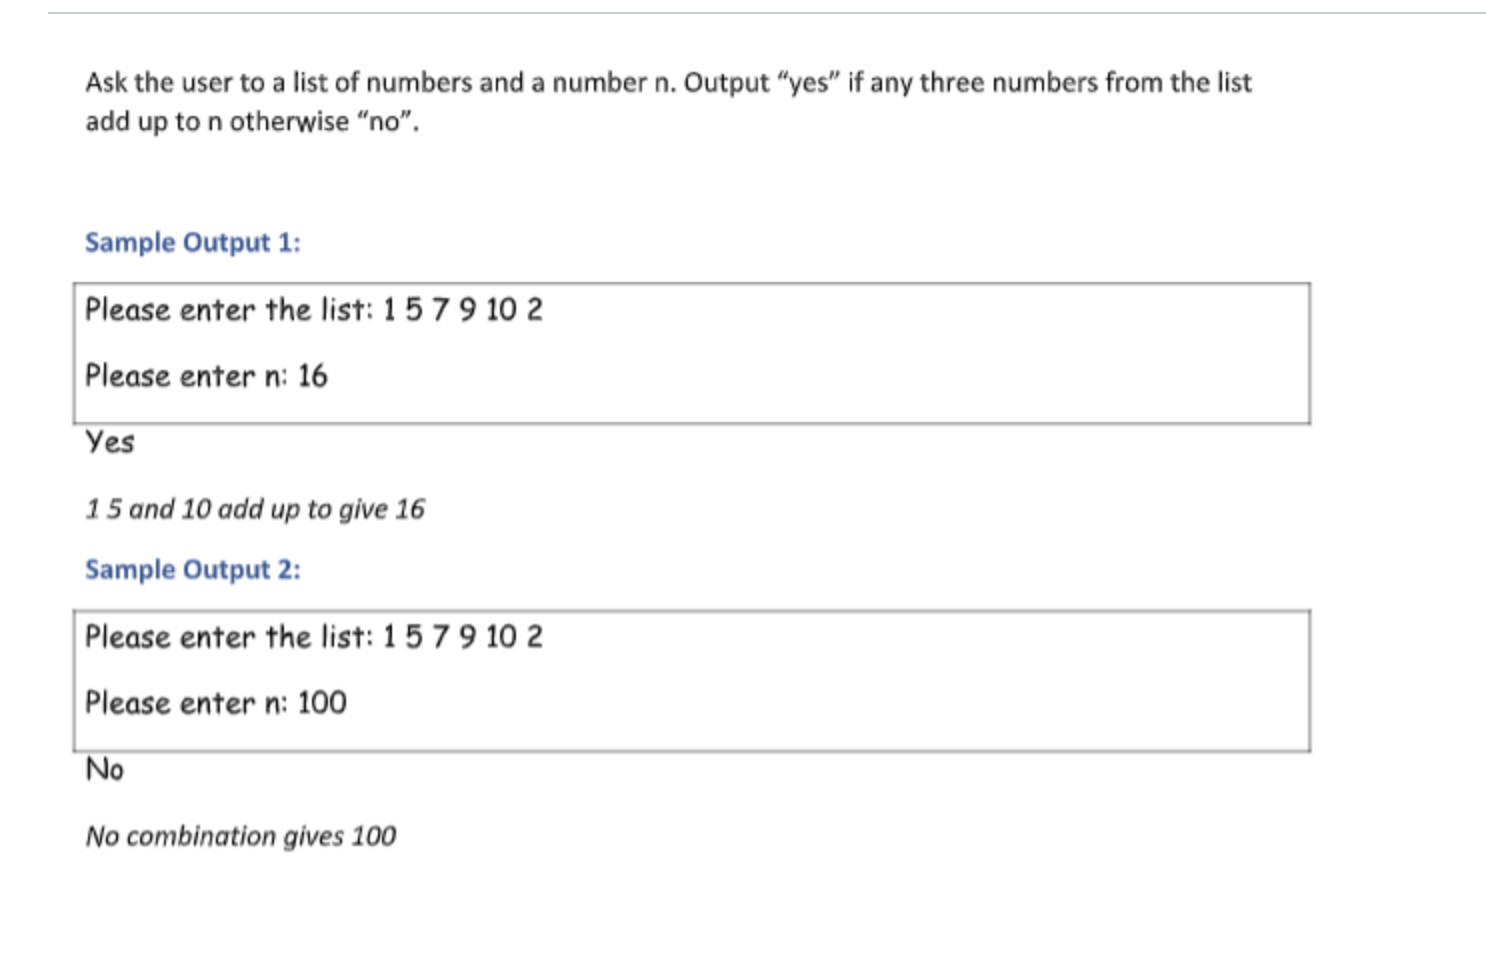 solved-ask-the-user-to-a-list-of-numbers-and-a-number-n-chegg